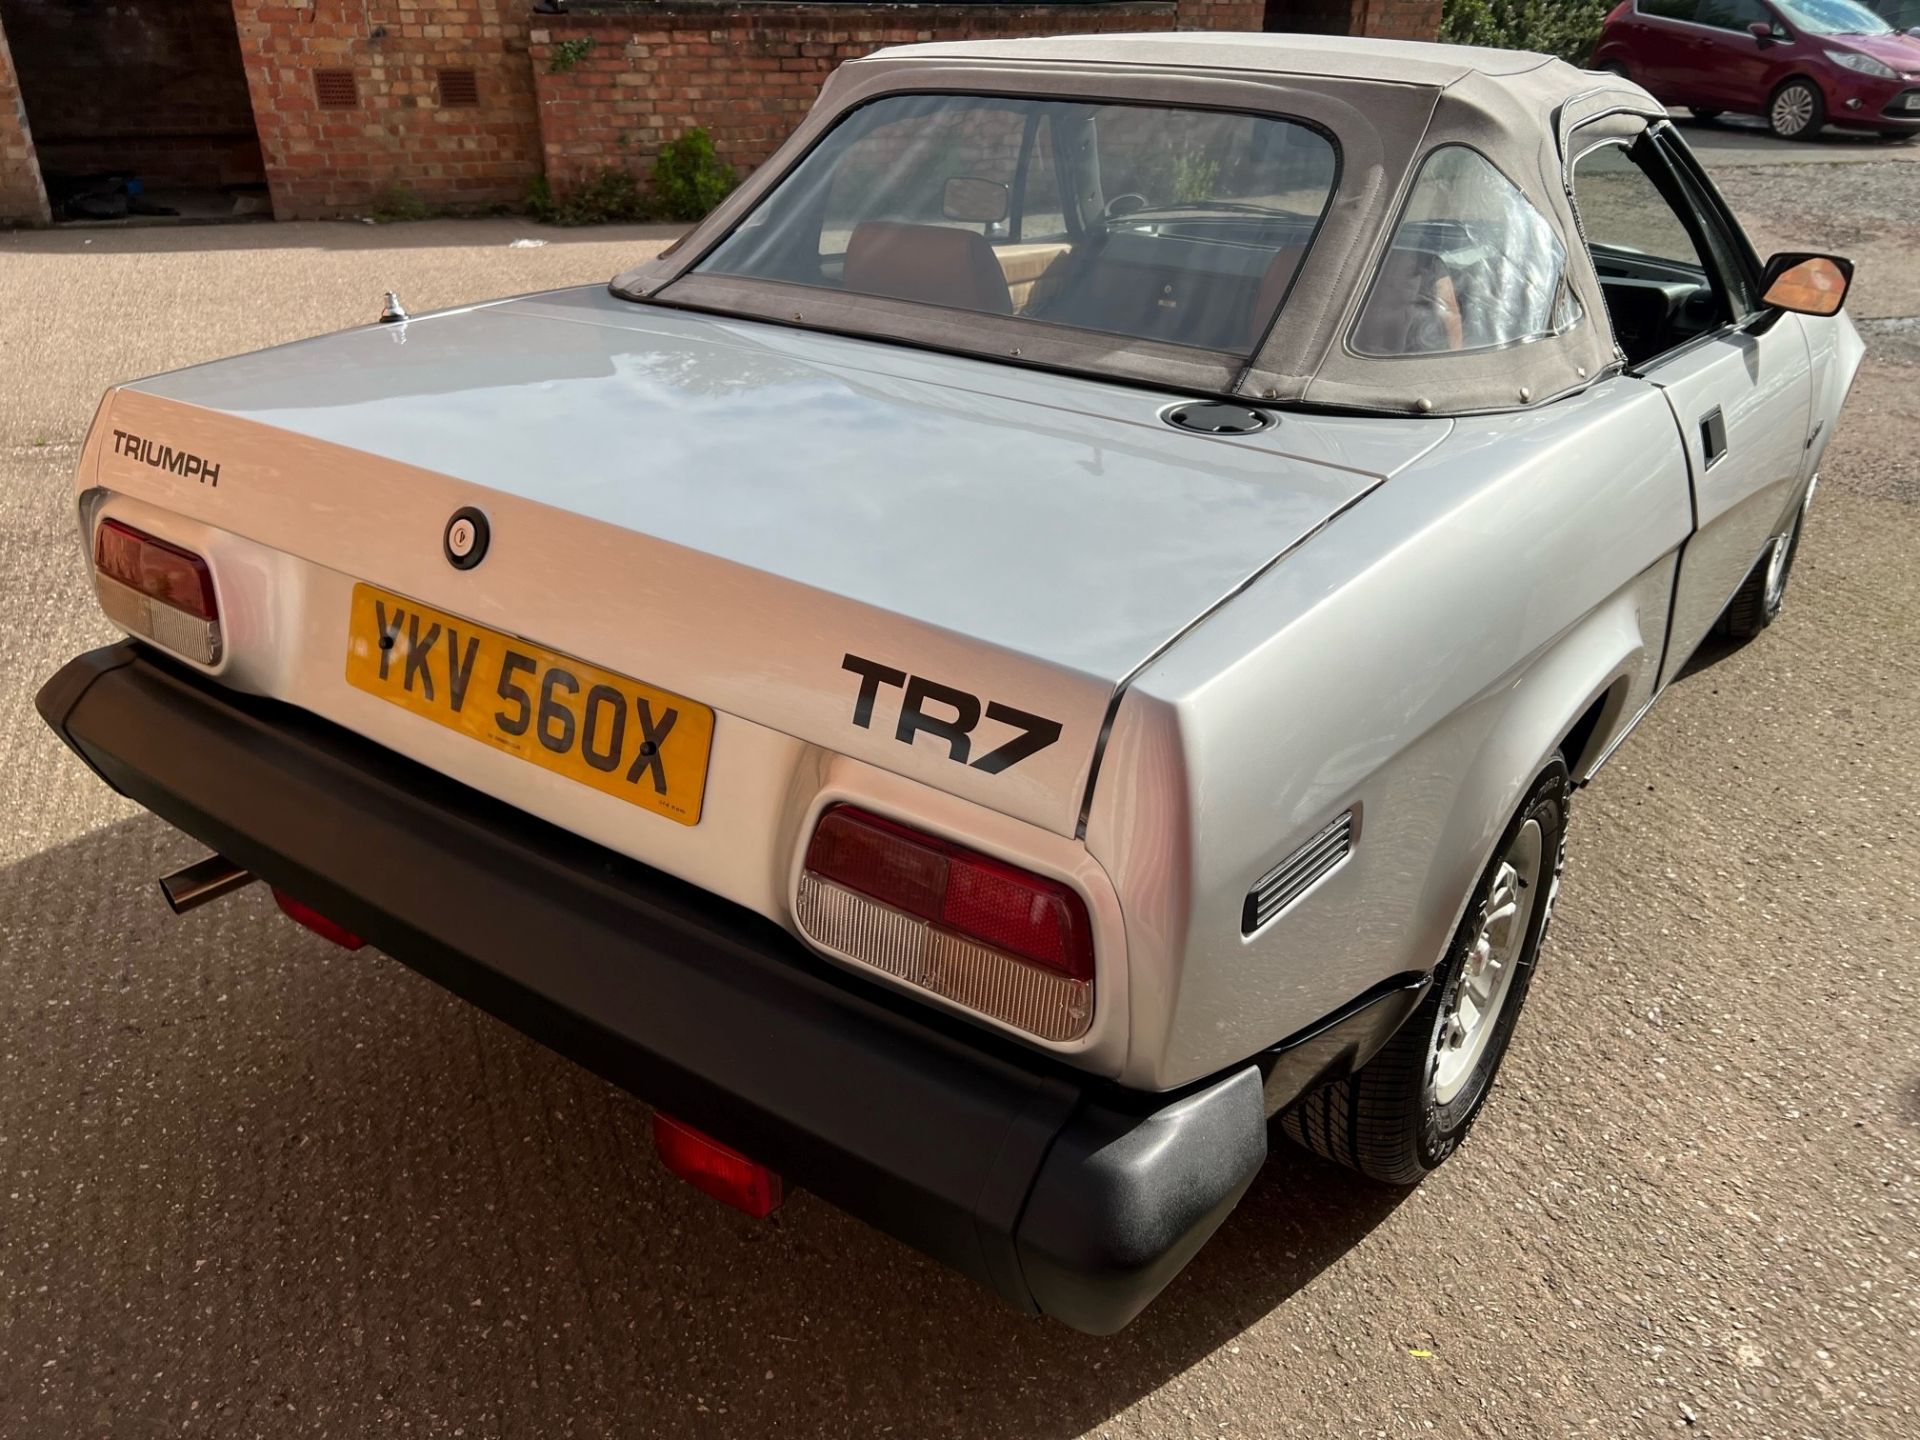 1982 Triumph TR7 Convertible Registration number YKV 560X Chassis number SATTPADJ7AA407800 - Image 9 of 16